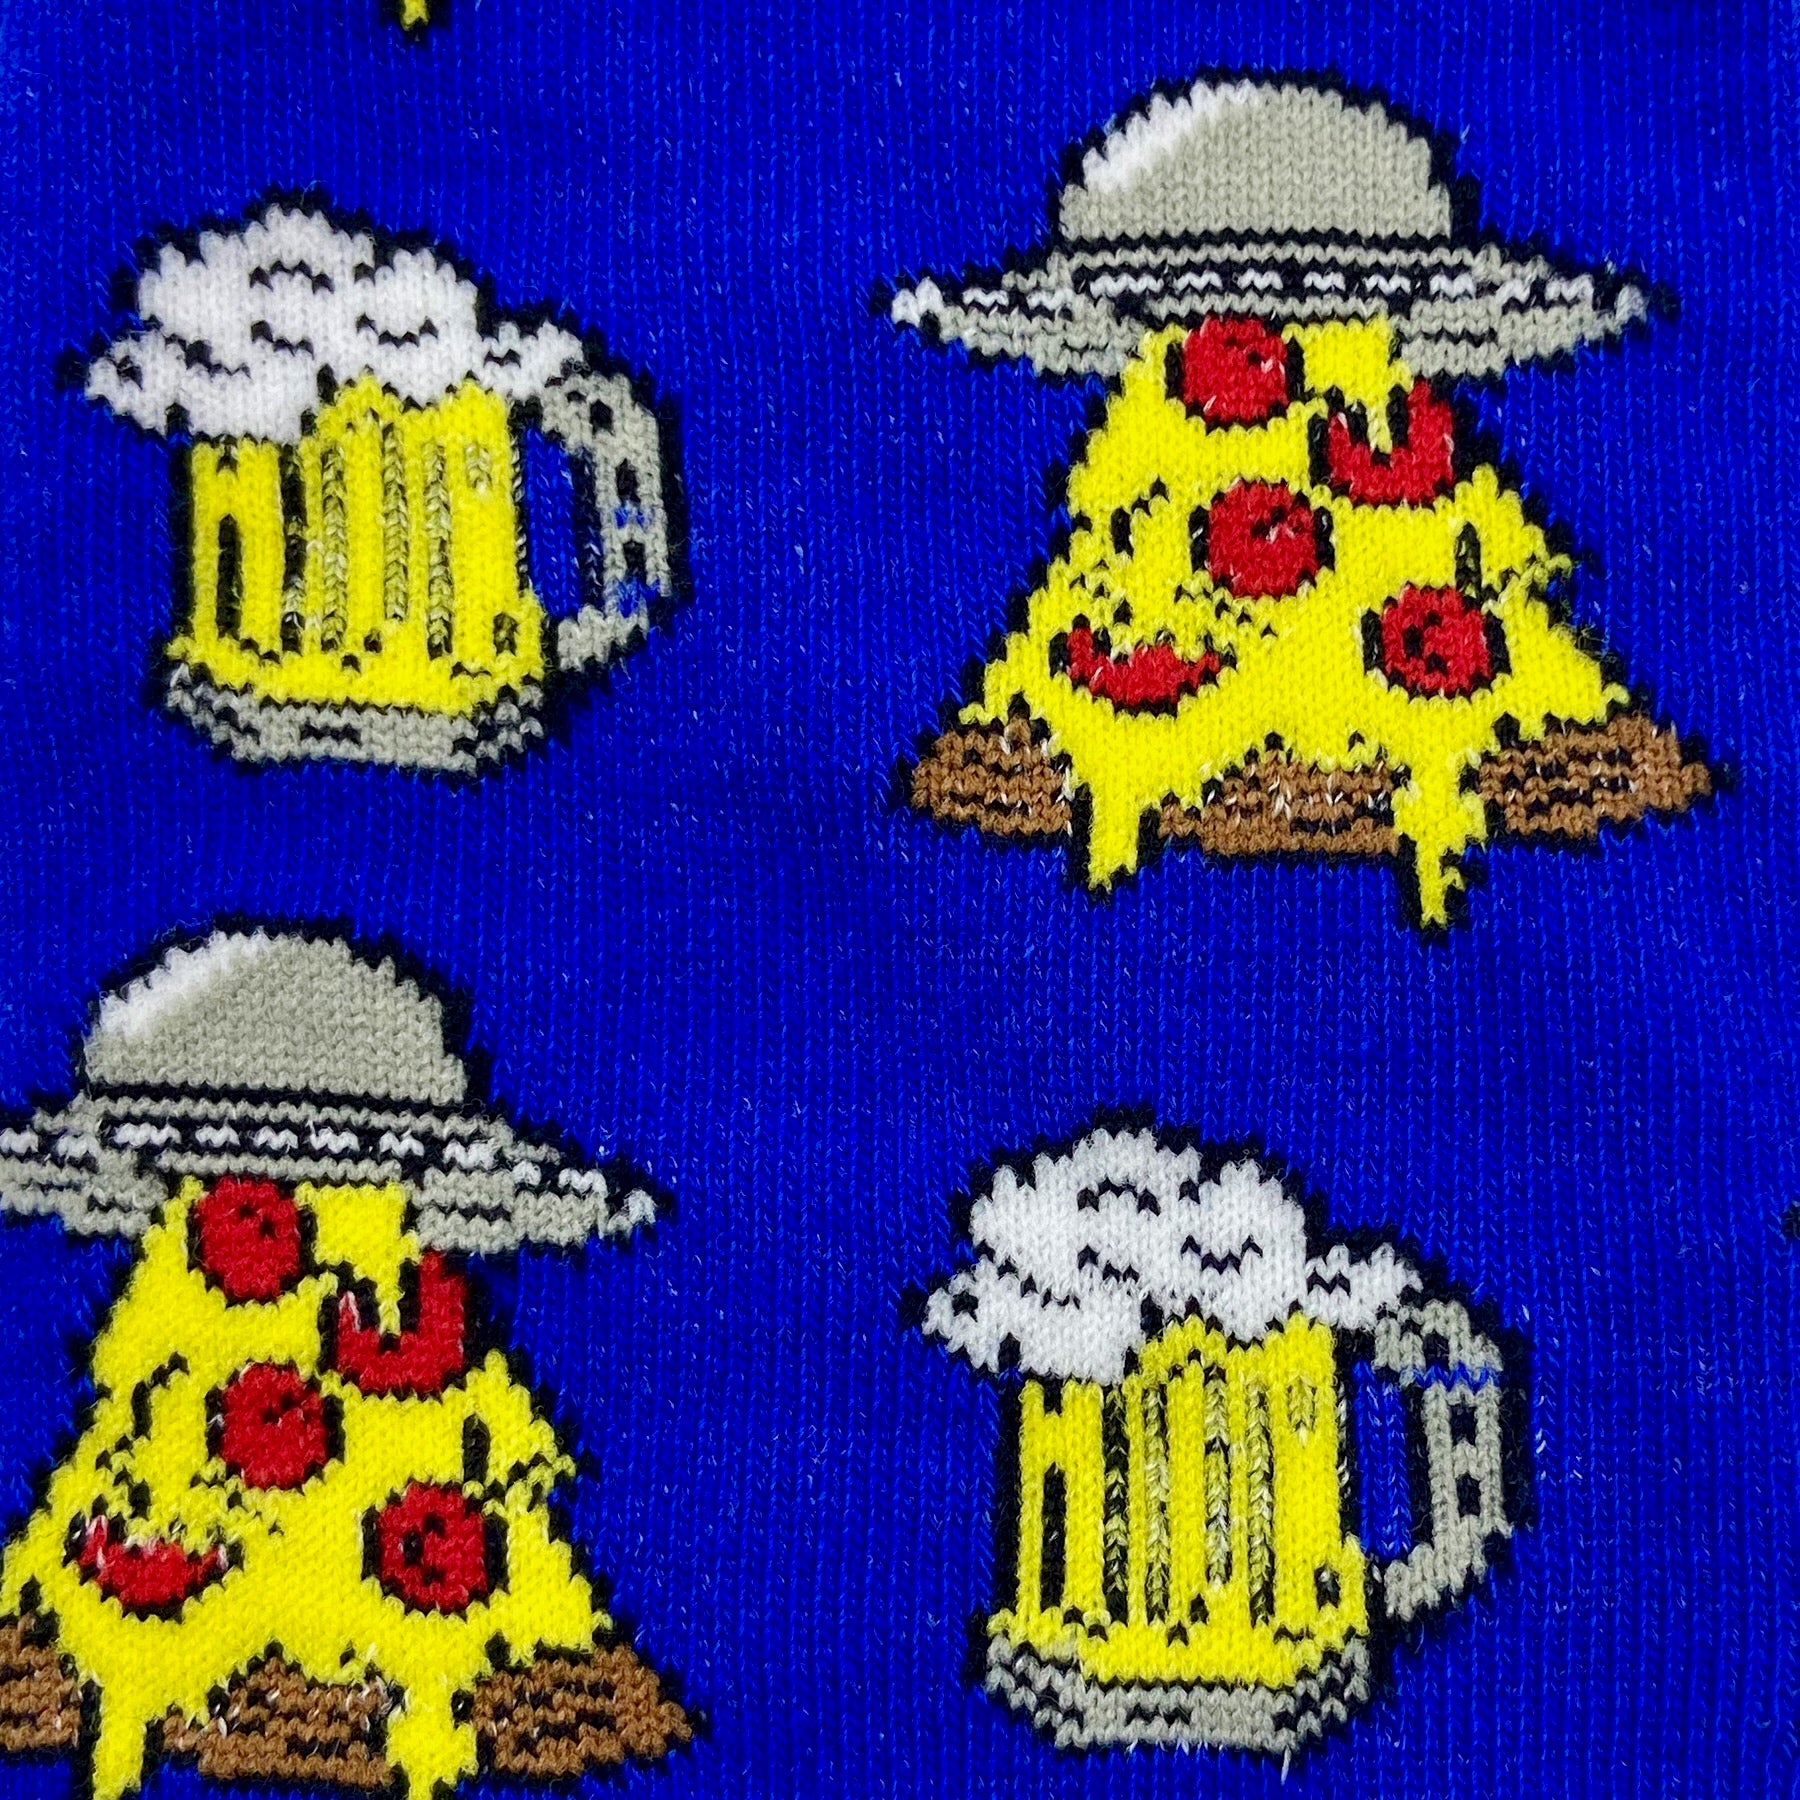 Unisex UFOs Beaming Down Pizza and Beer Patterned Novelty Crew Socks